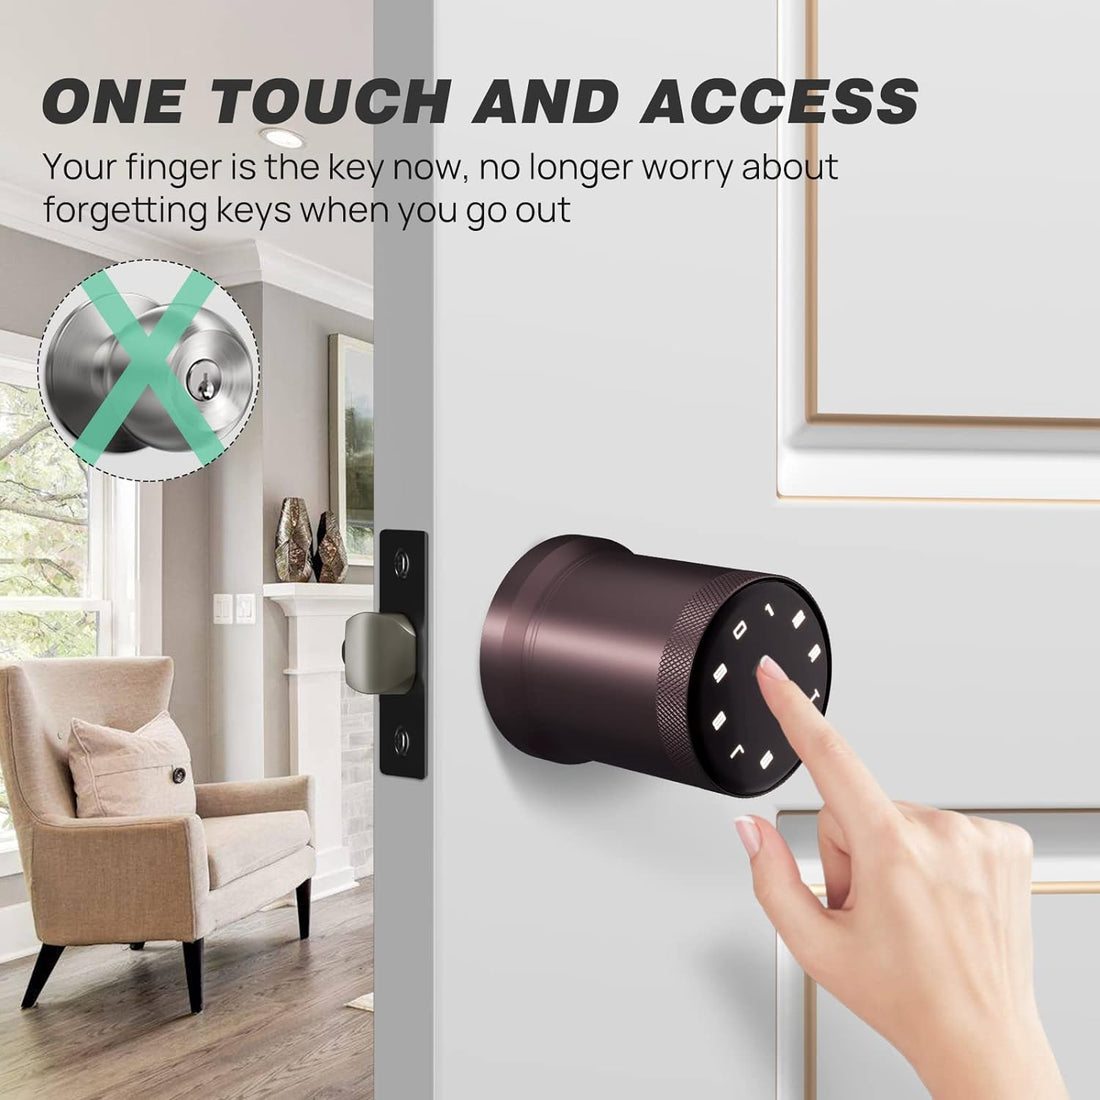 VICMEON Keyless Entry Door Lock with Voice Function, Smart Door Knob with LED Keypad and Key, Smart Door Knob Remote Control with APP for Bedroom Garage Office Hotels (Bronze)